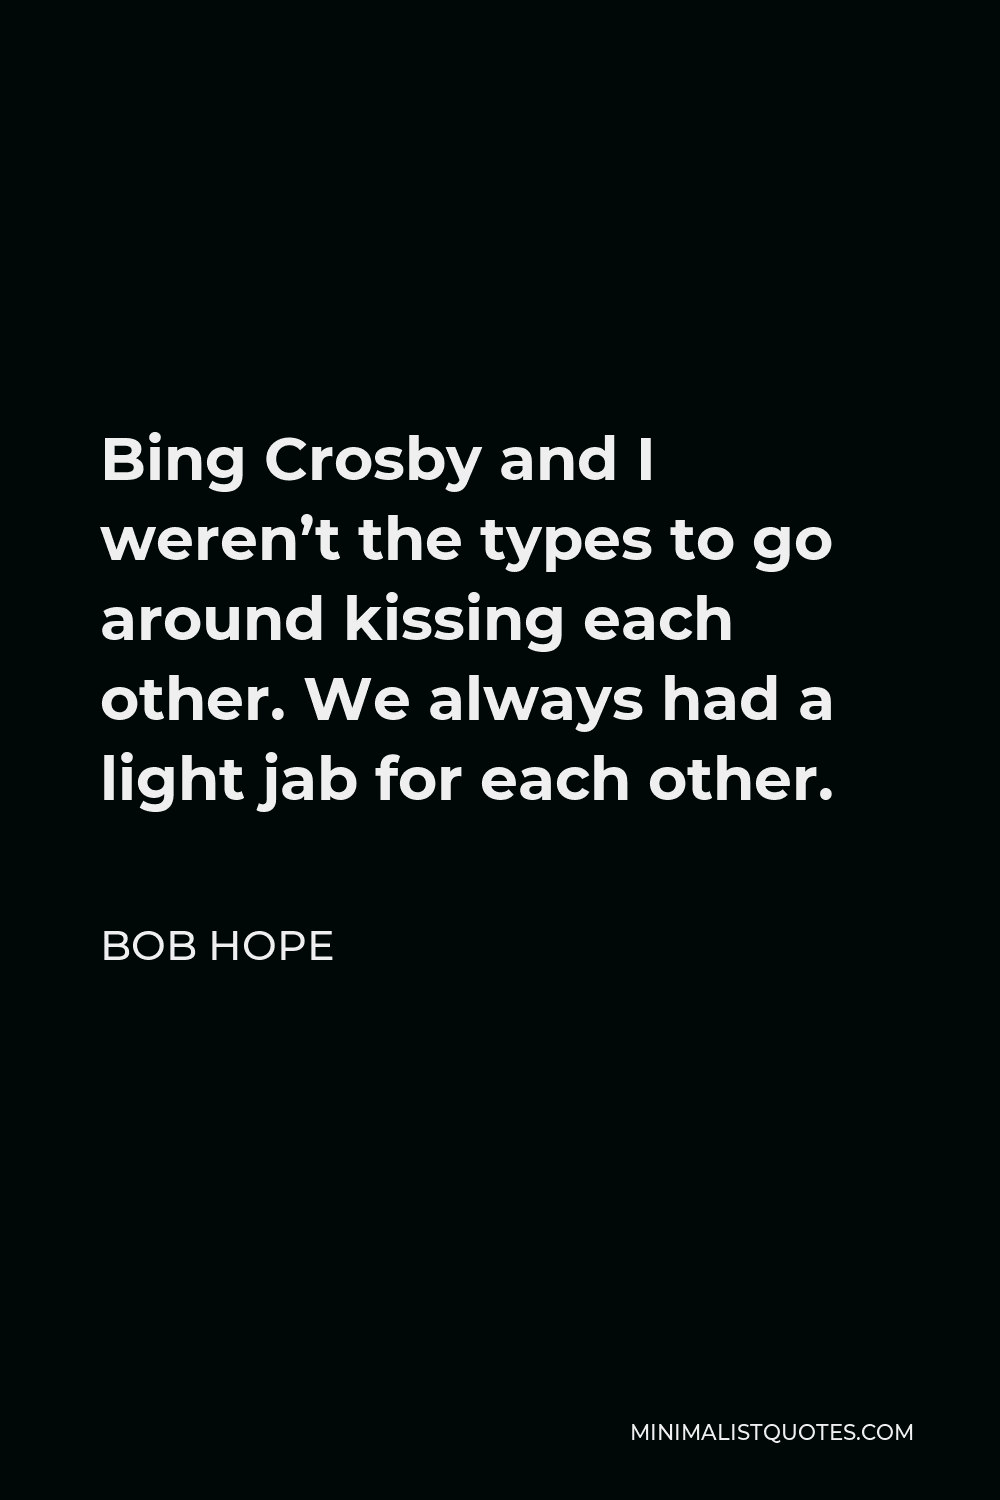 Bob Hope Quote - Bing Crosby and I weren’t the types to go around kissing each other. We always had a light jab for each other.